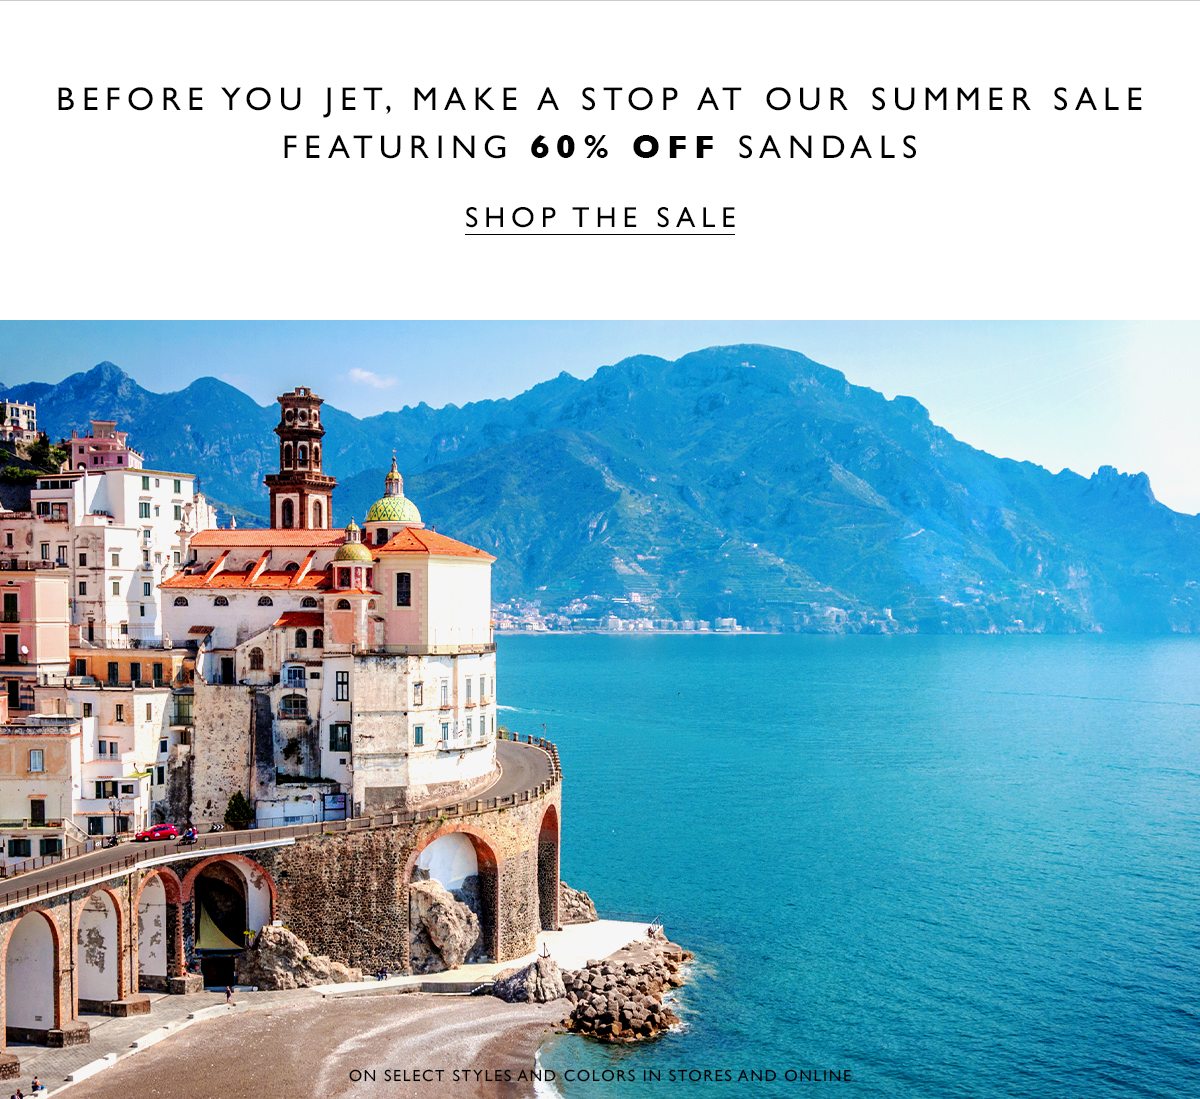 Before you jet, make a stop at our summer sale featuring 60% off sandals. SHOP THE SALE.